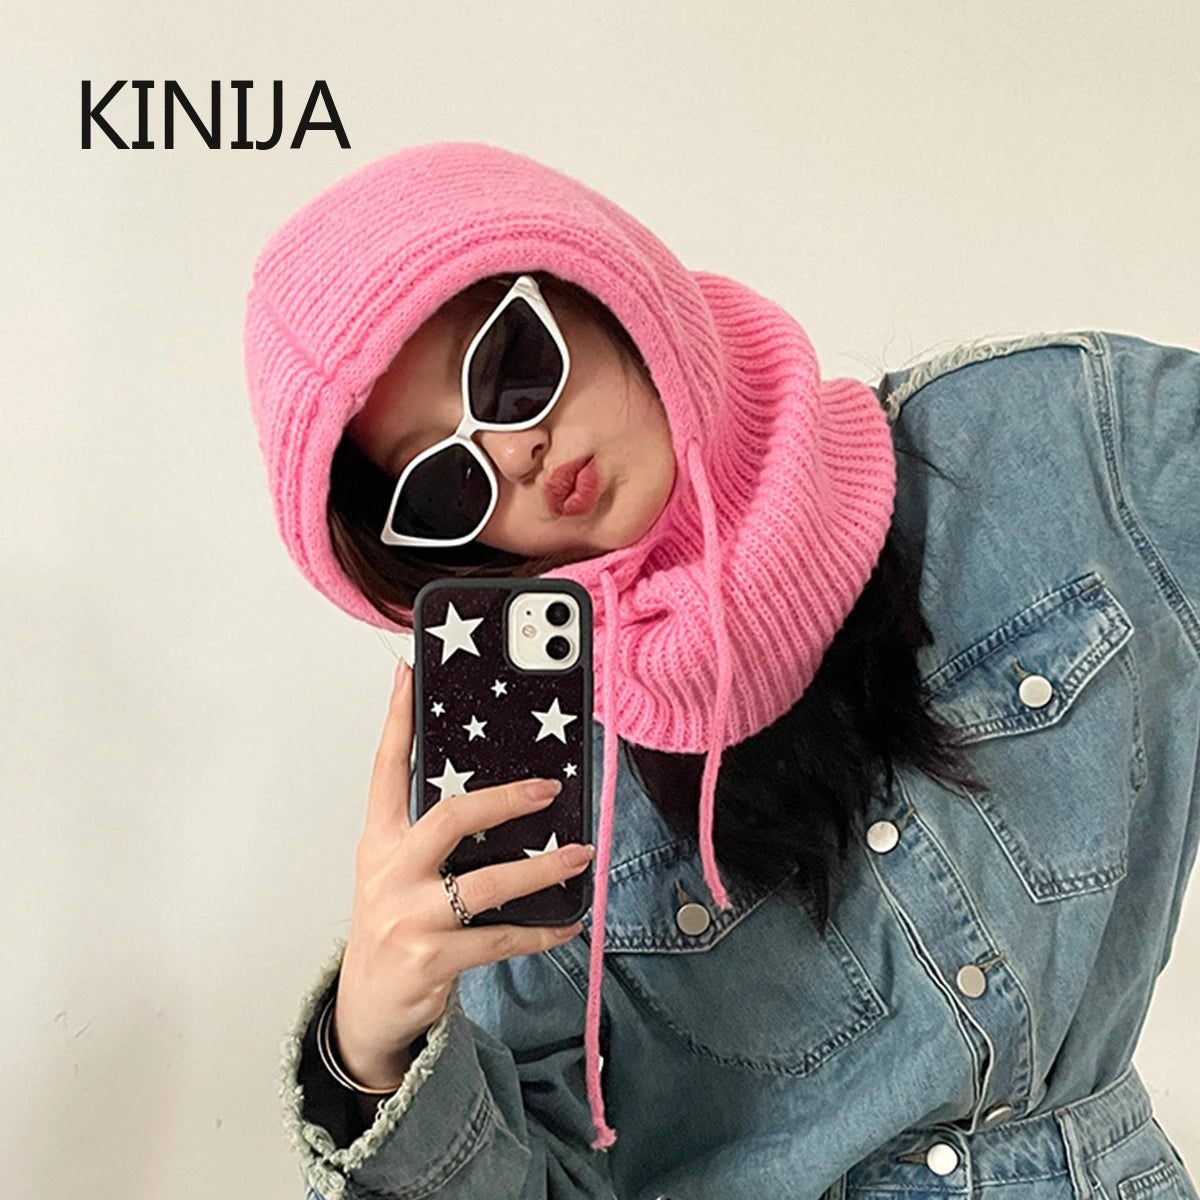 Women's Knitted Balaclava Fashion Hooded Hat: Thick Warm Beanie Winter Hat with Fake Collar Shawl